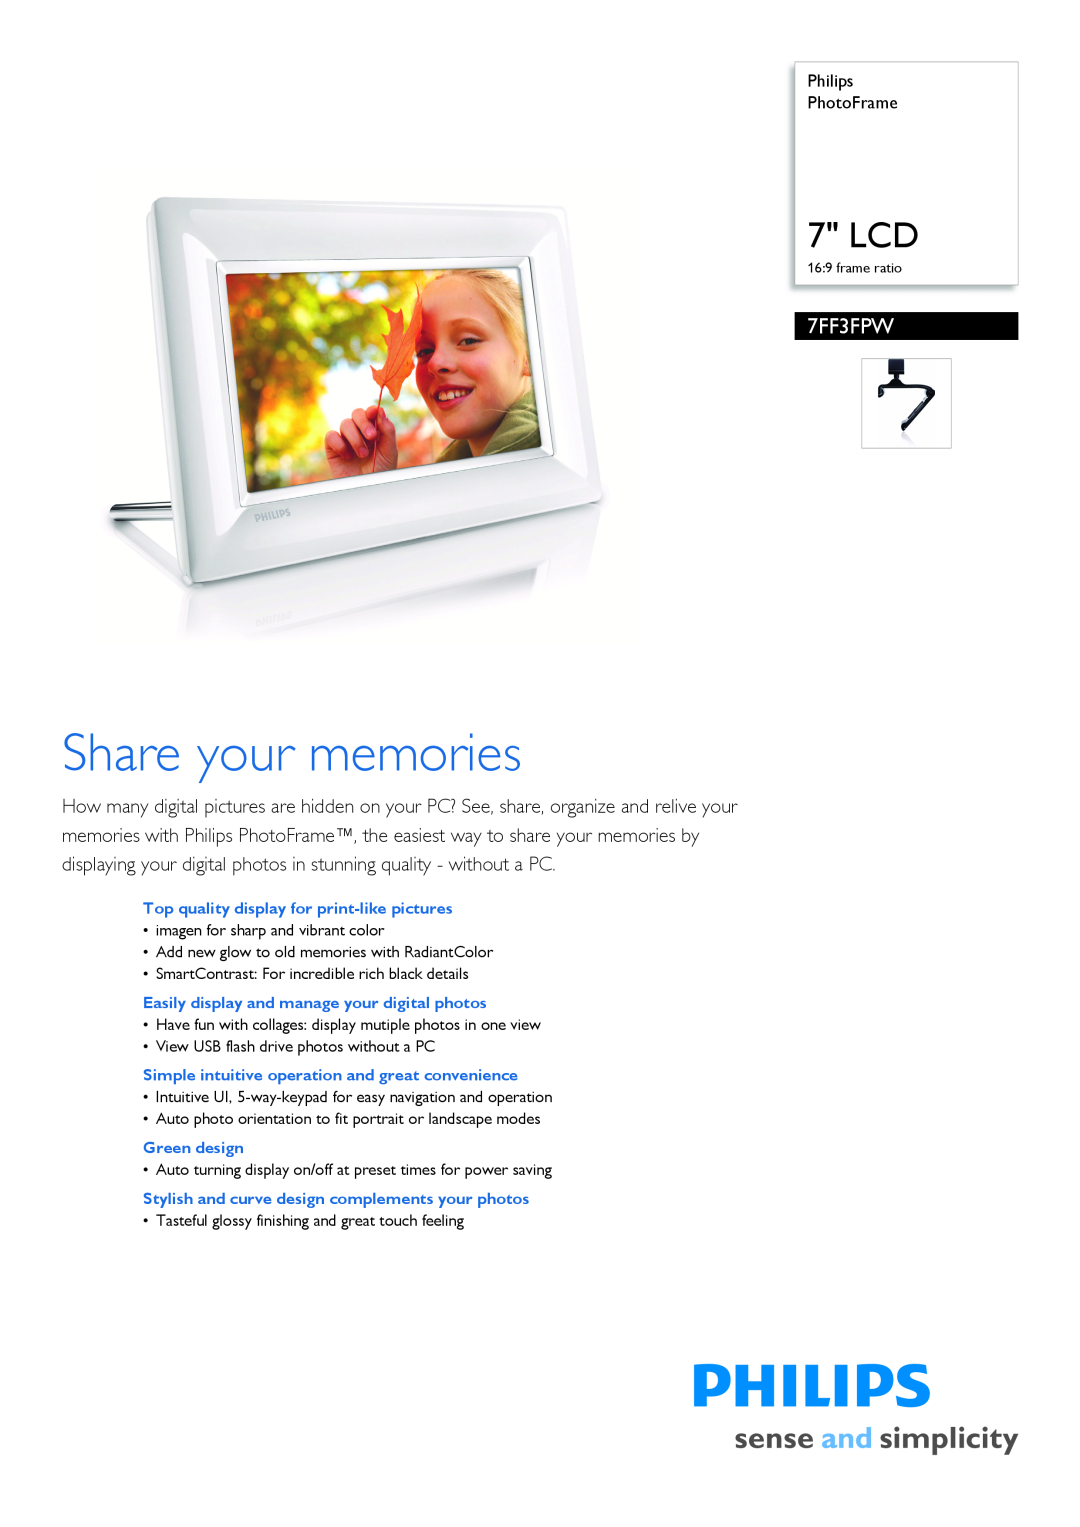 Philips 7FF3FPW/93 manual Philips PhotoFrame, Top quality display for print-like pictures, Green design, 7 LCD 